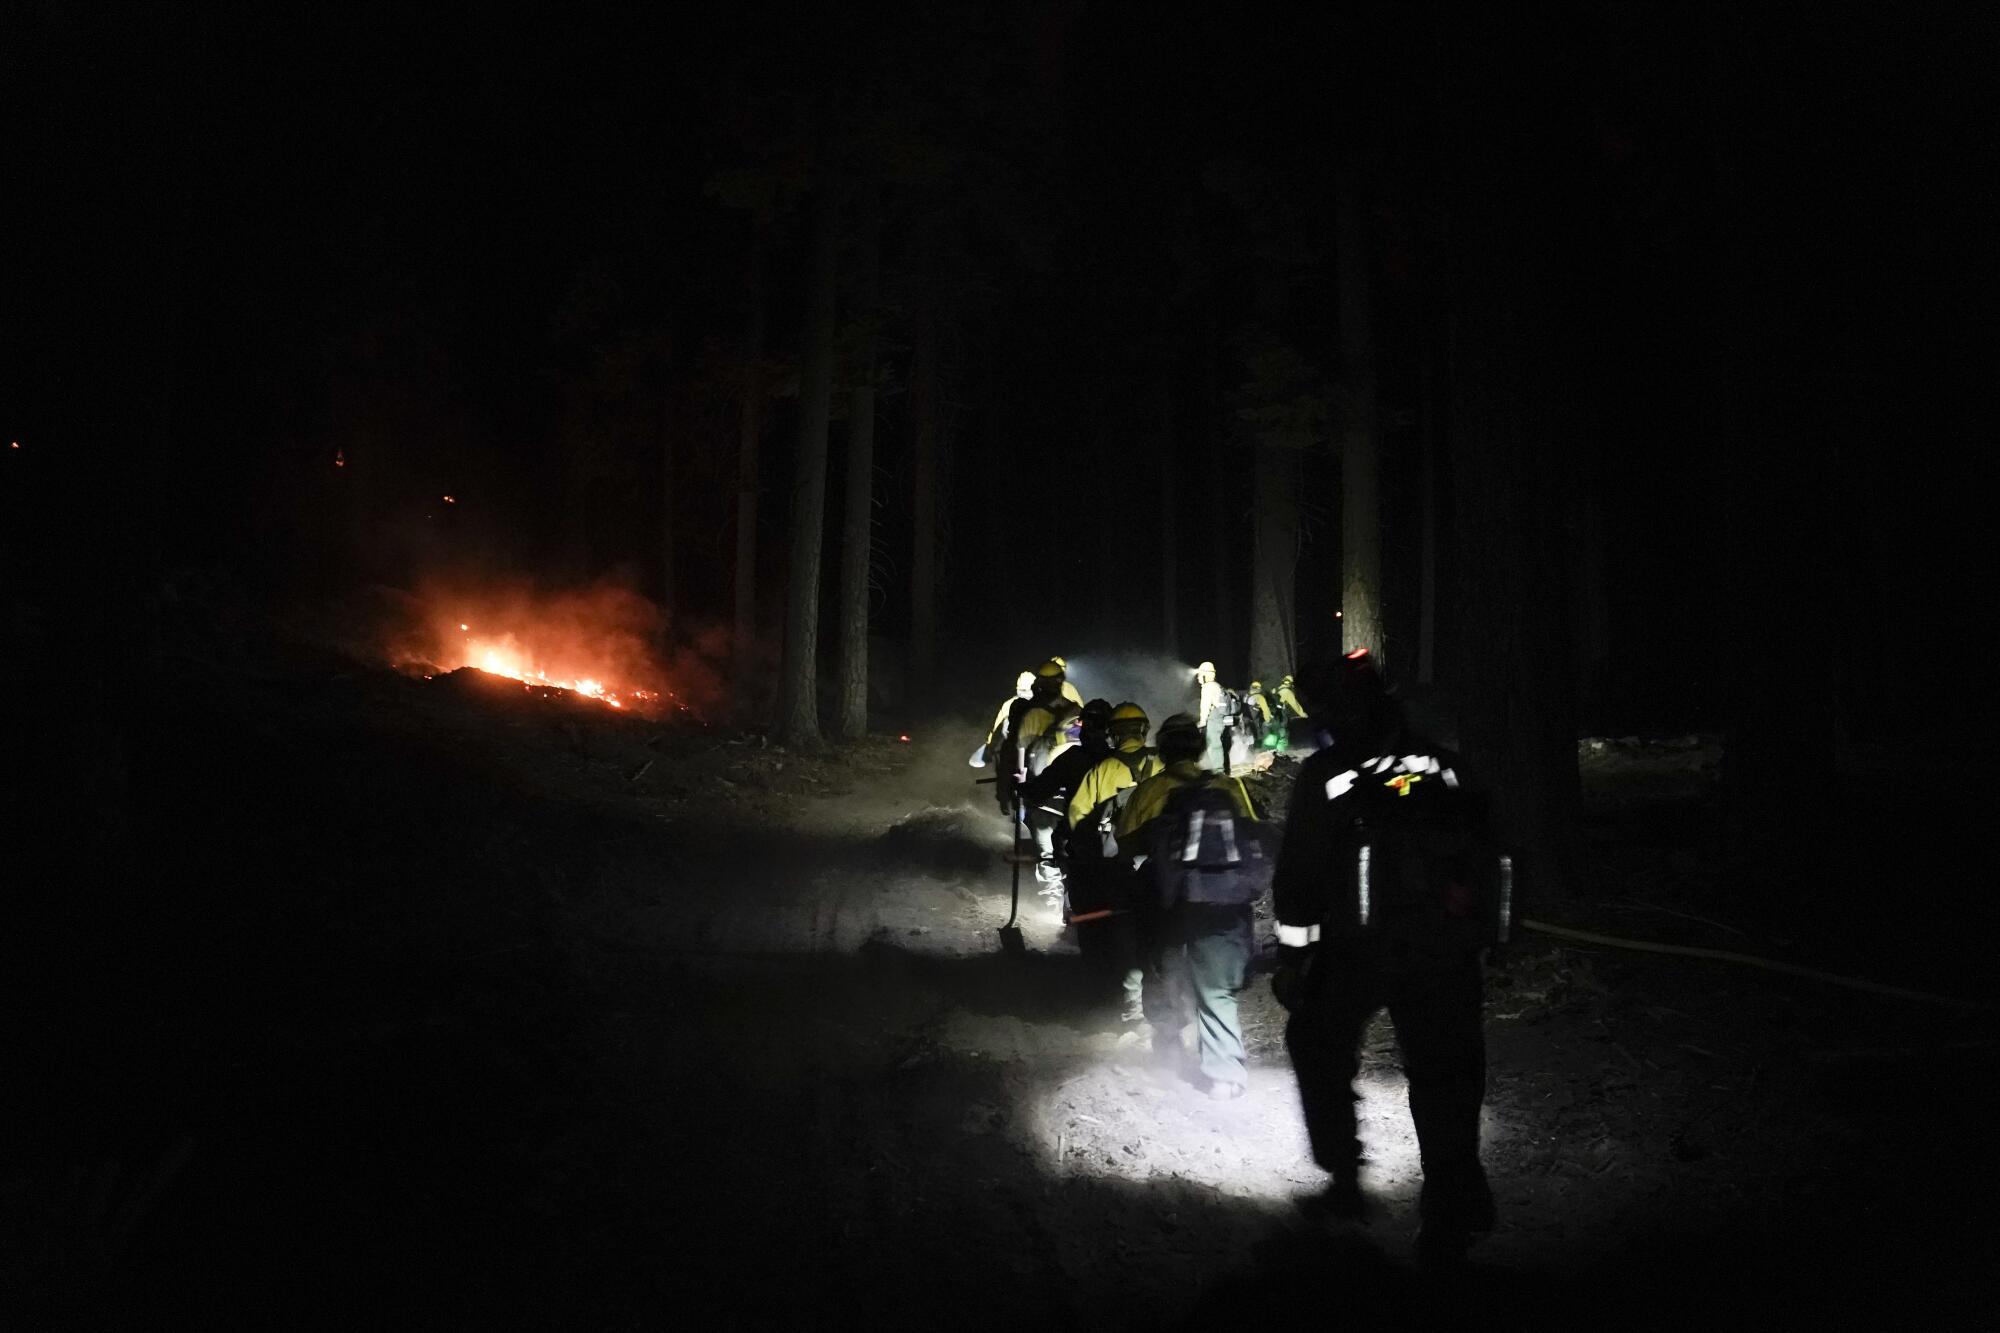 Firefighters battling the Caldor fire walk toward flames near South Lake Tahoe on Monday.